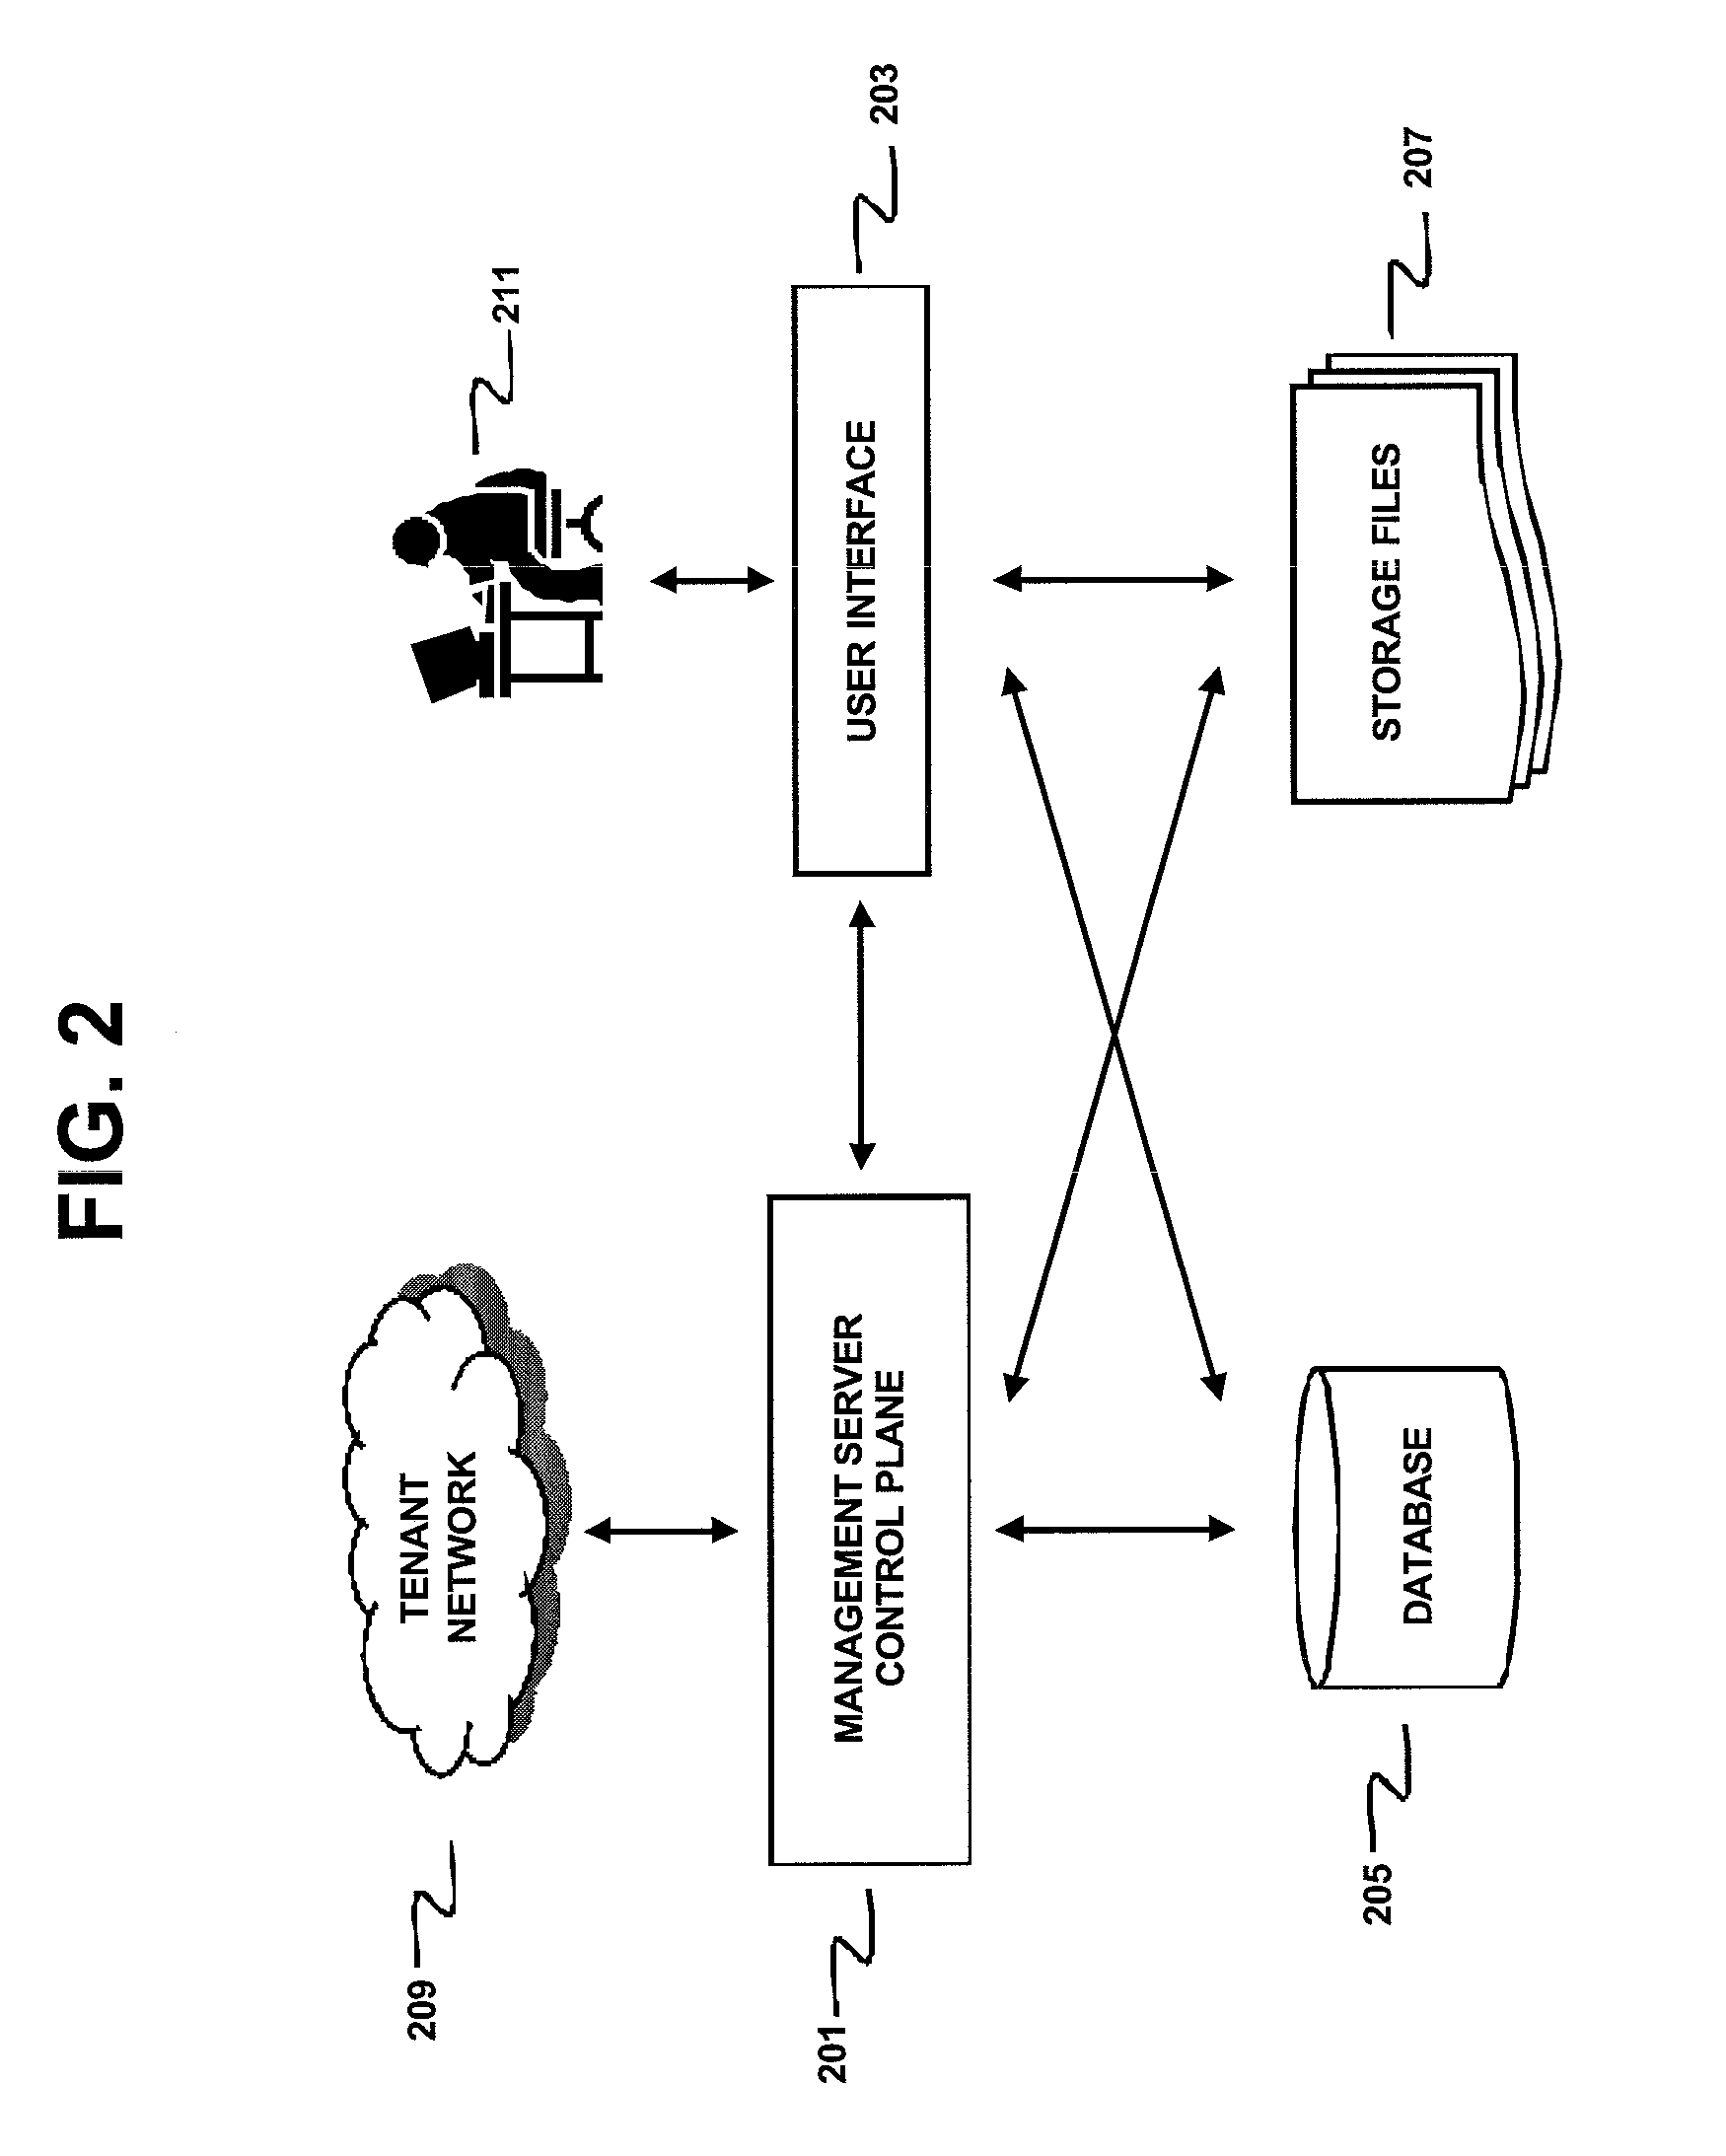 Method, Apparatus And Computer Program Product Implementing Multi-Tenancy For Network Monitoring Tools Using Virtualization Technology